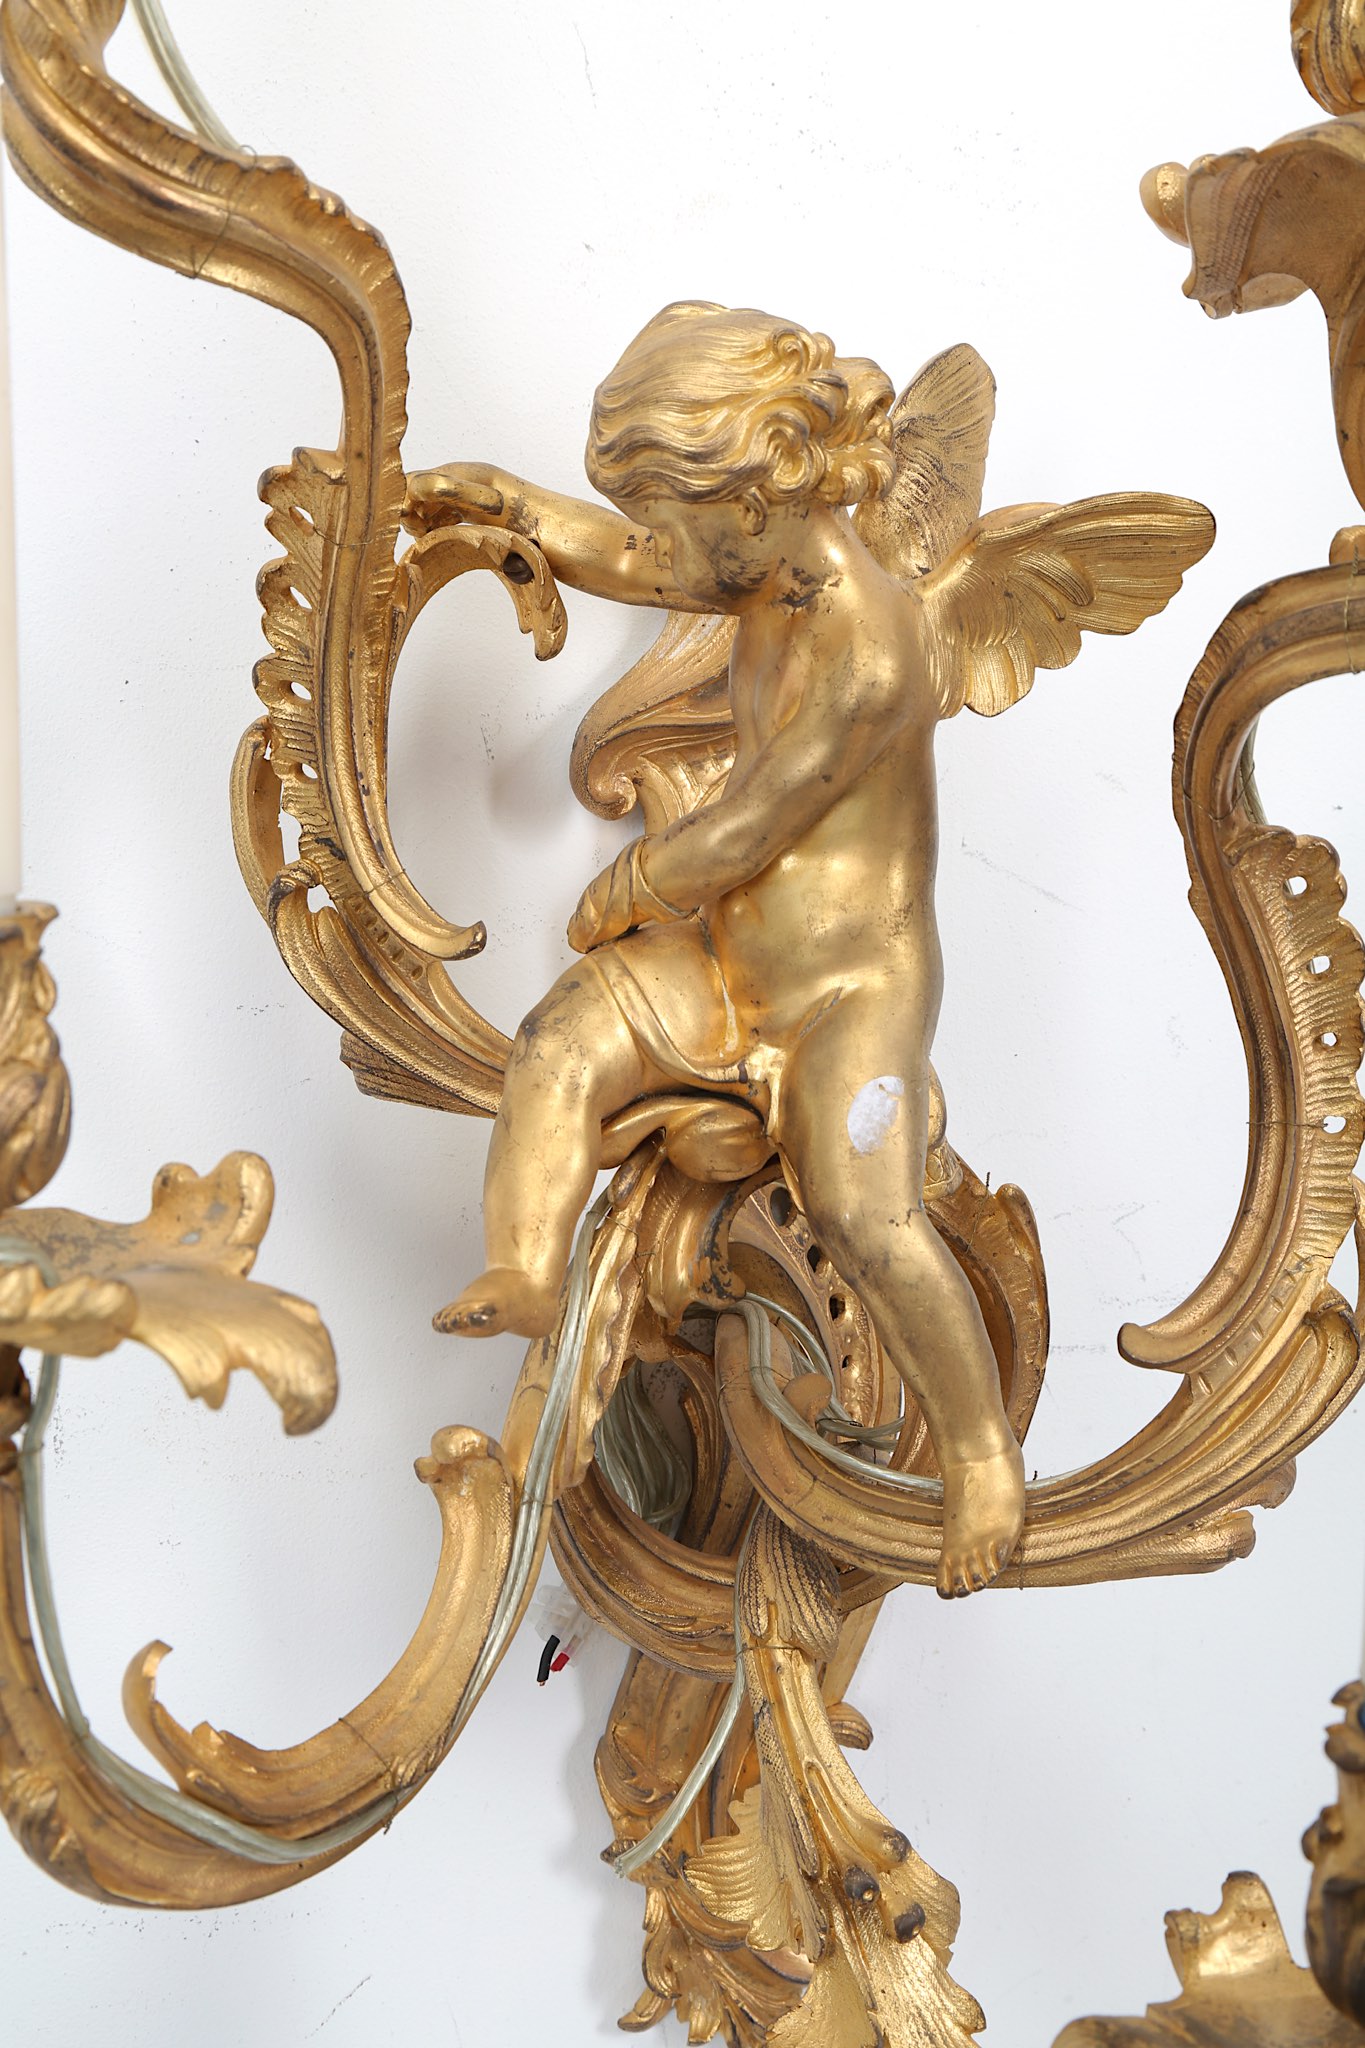 A LARGE AND IMPRESSIVE PAIR OF 19TH CENTURY FRENCH GILT BRONZE FIGURAL WALL LIGHTS IN THE ROCOCO - Image 3 of 7